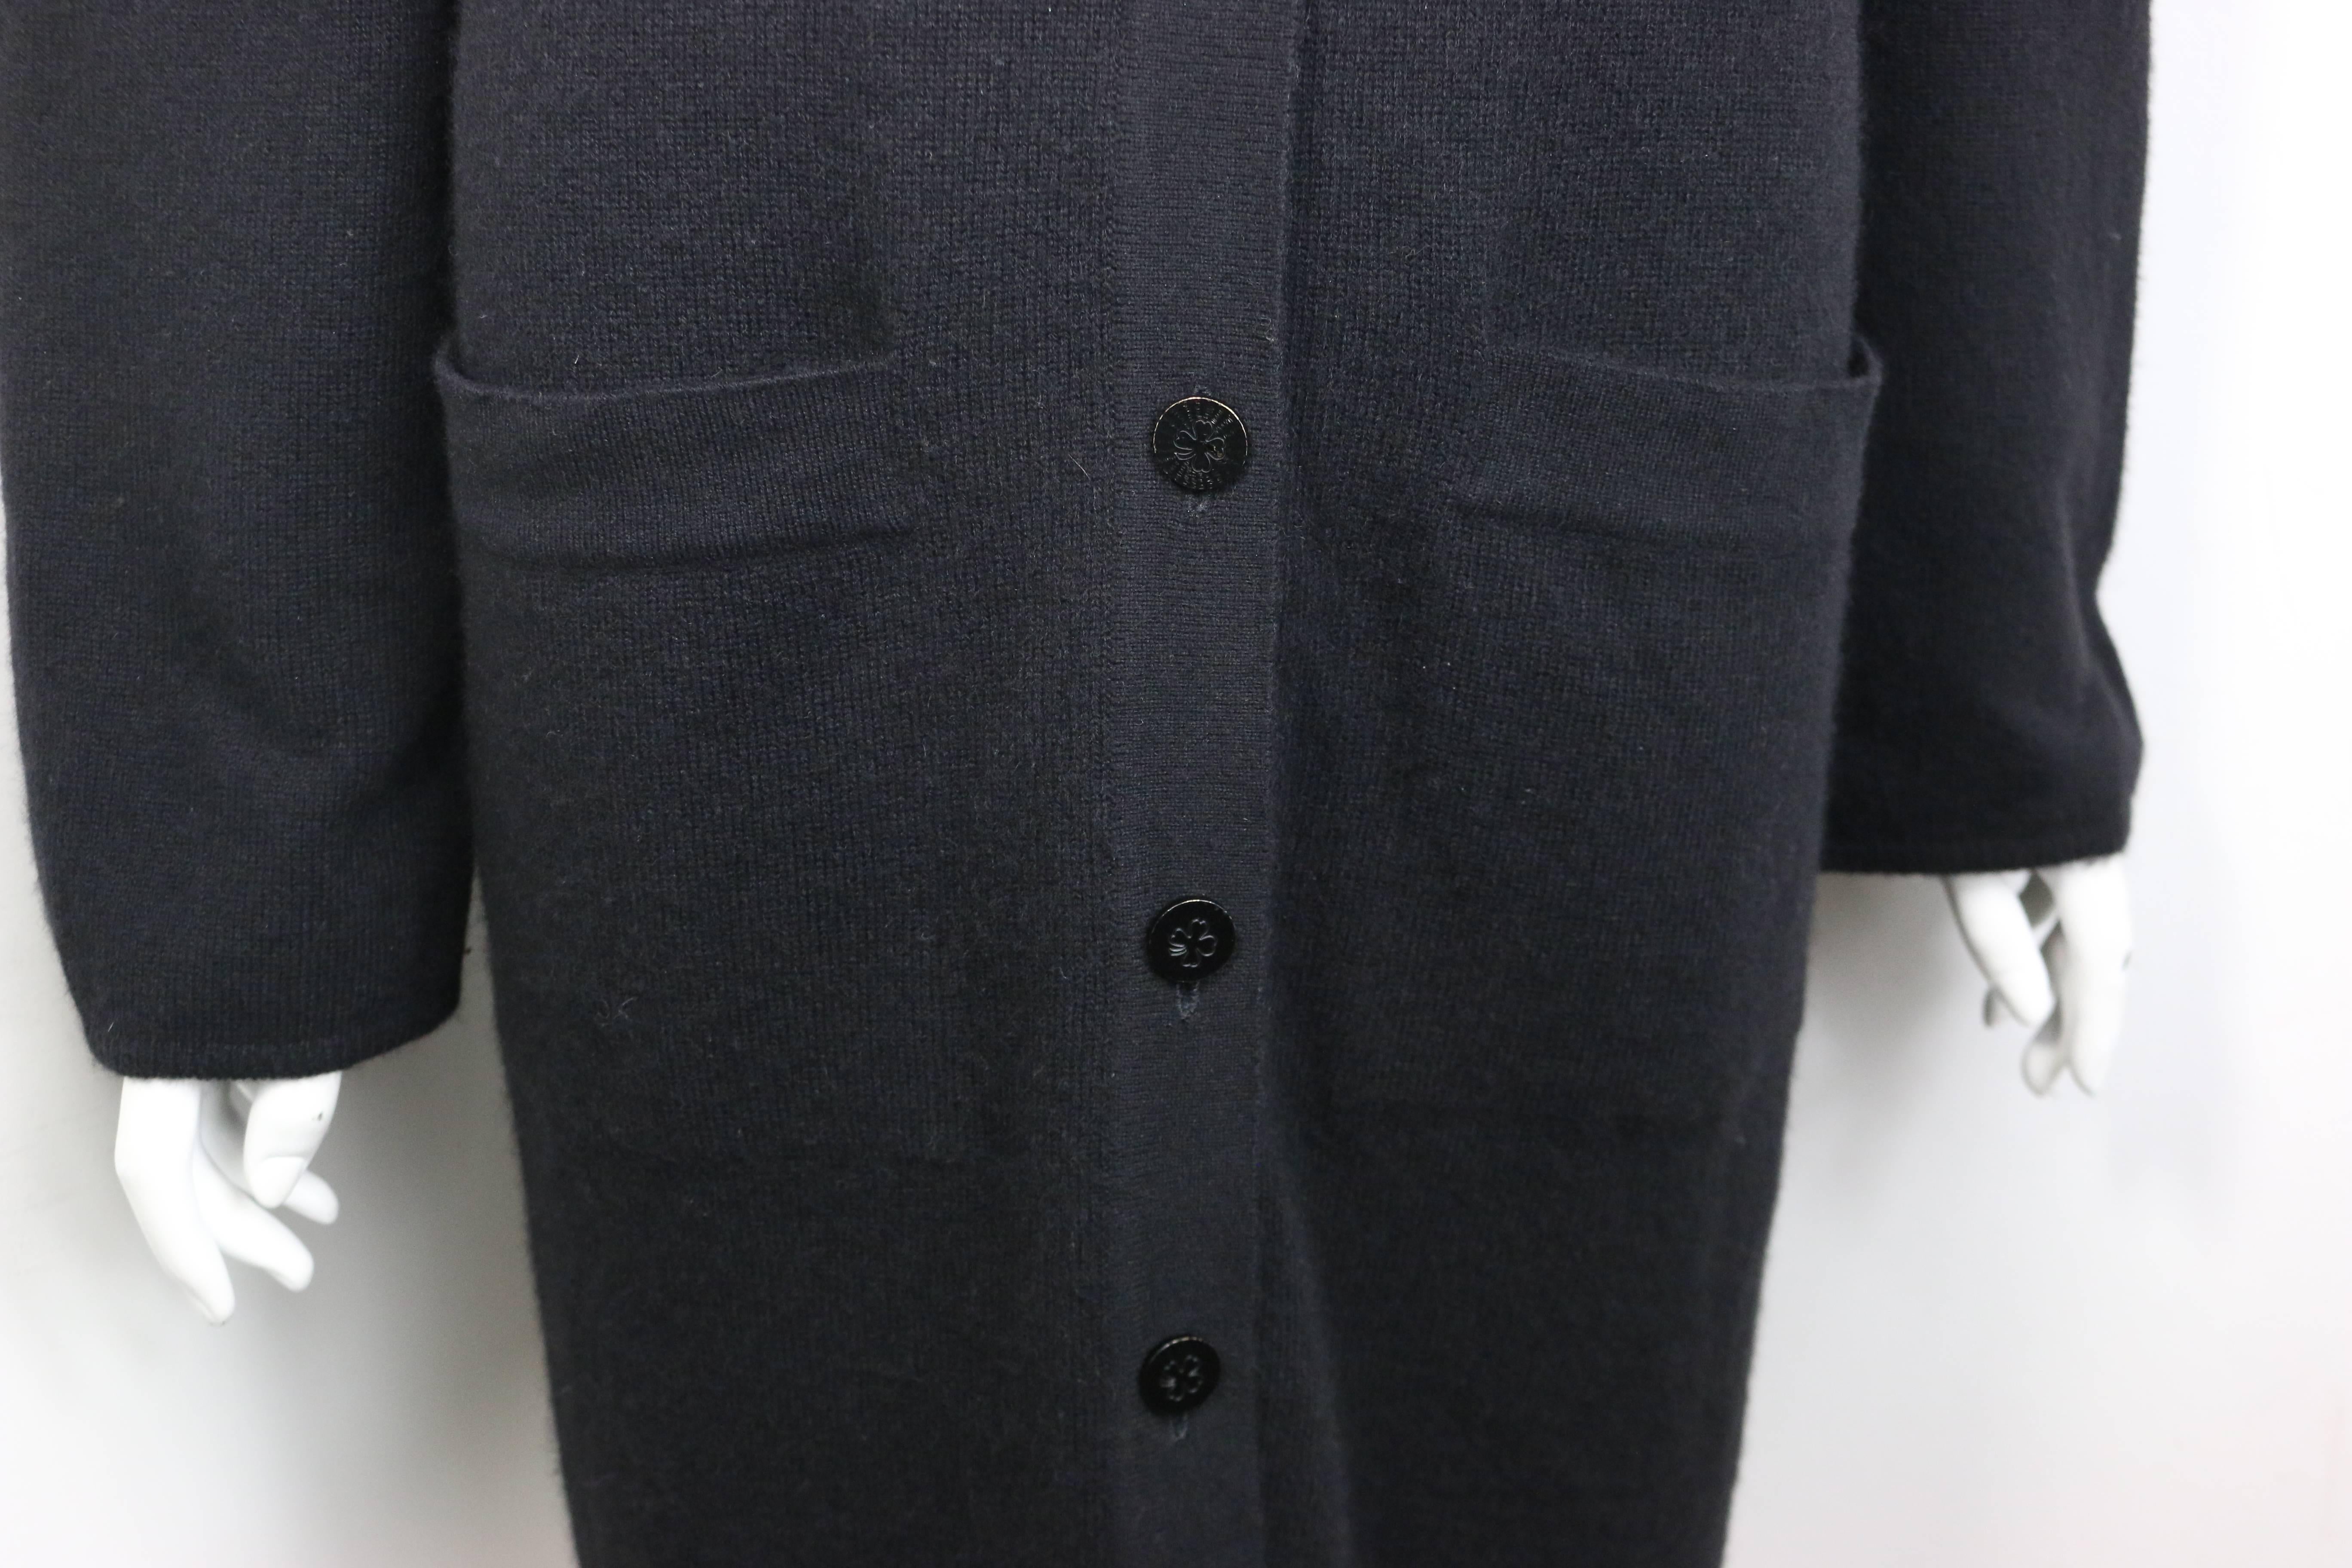 - Vintage Chanel black cashmere long cardigan from 1998 A/W collection. 

- Black toned hardware "CC" buttons closure. 

- Two front open pockets. 

- Size 40. 

- 100% Cashmere. 